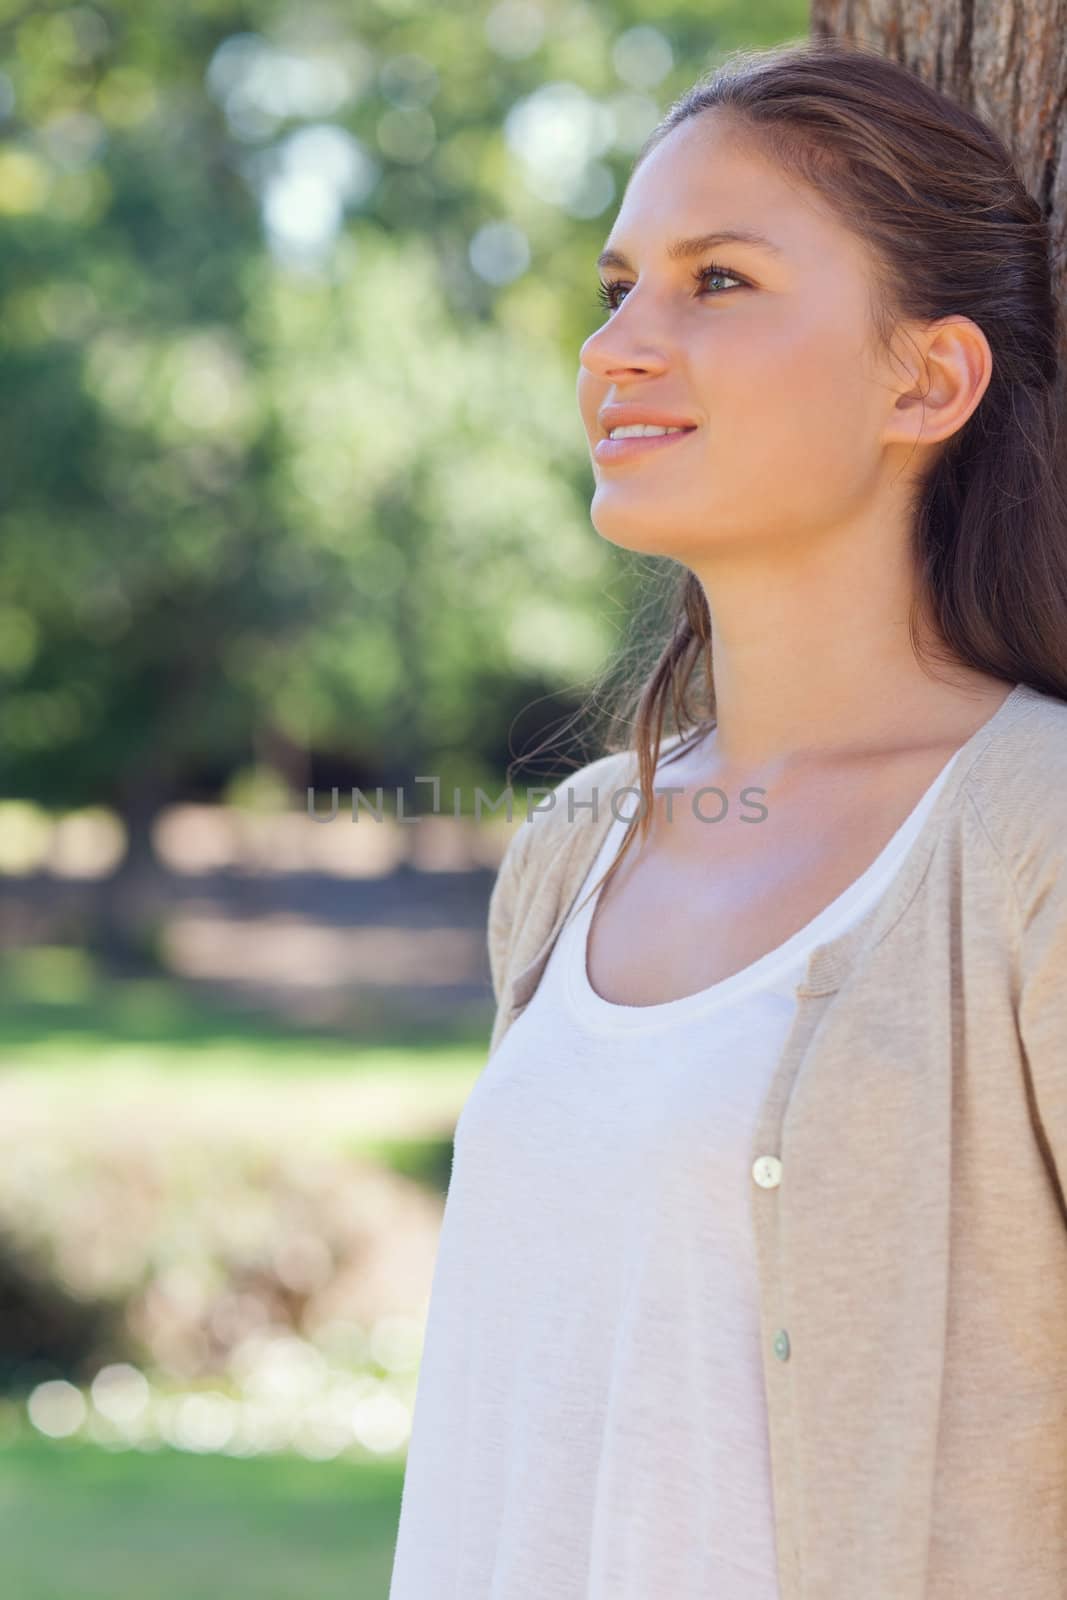 Smiling young woman leaning against a tree in the park